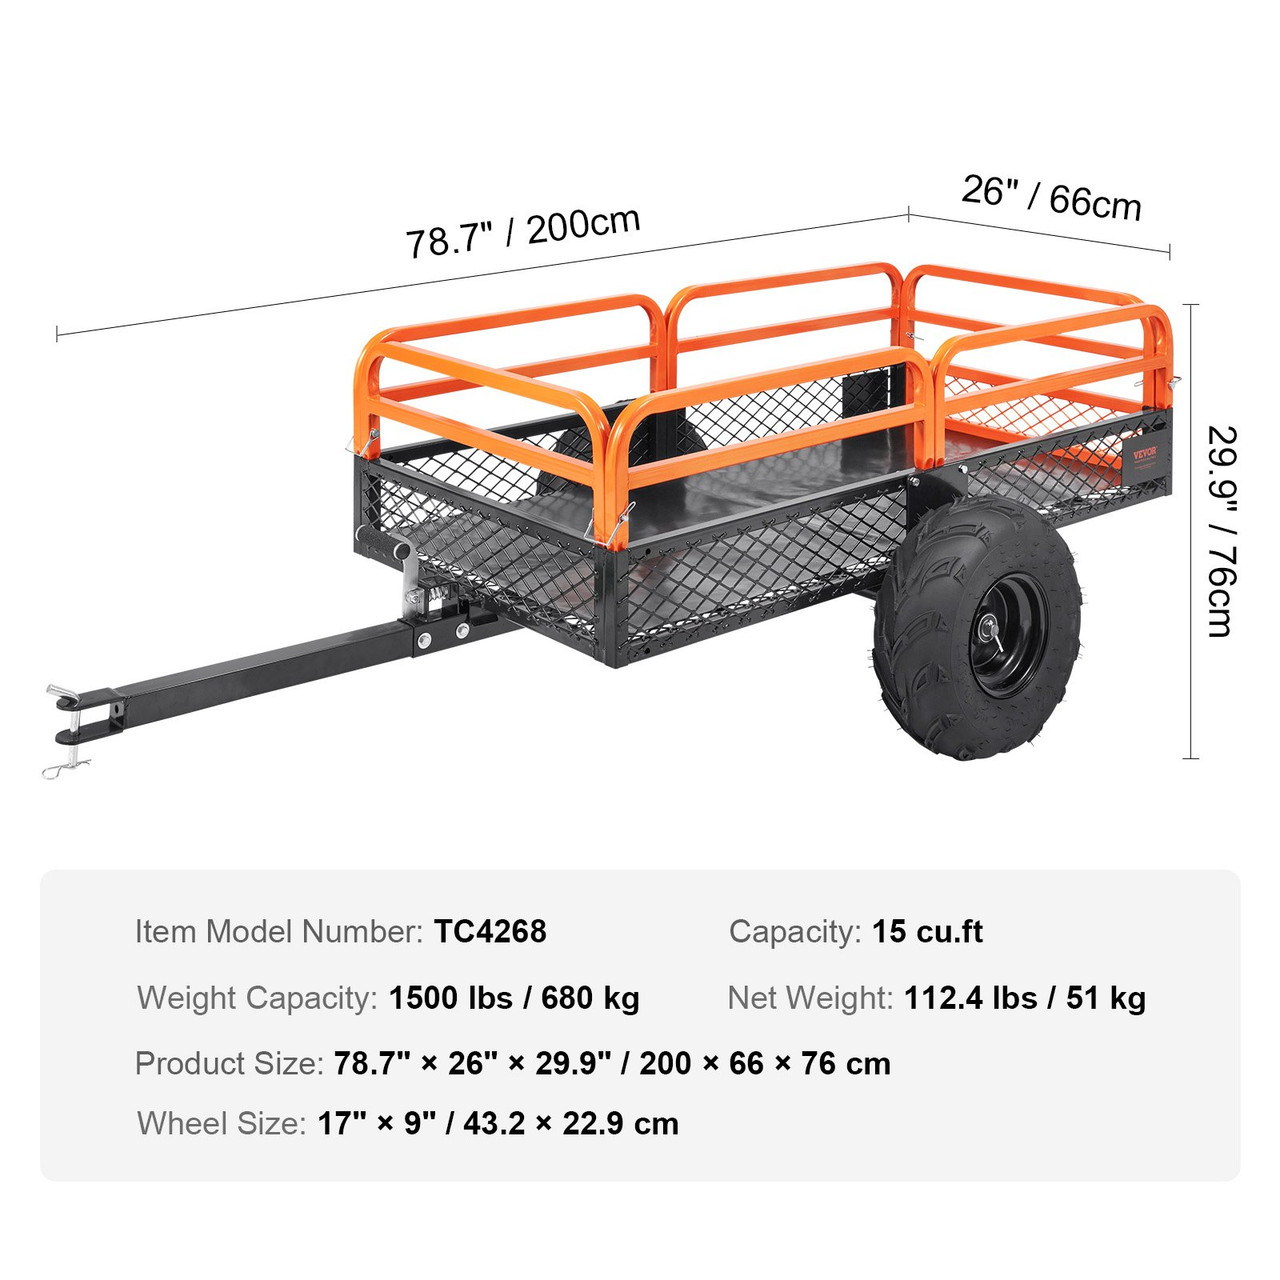 Heavy Duty Steel ATV Dump Trailer, 1500-Pound Load Capacity 15 Cubic Feet, Tow Behind Dump Cart Garden Trailer, with Removable Sides and 2 Tires, for Mowers, Tractors, ATV, UTV